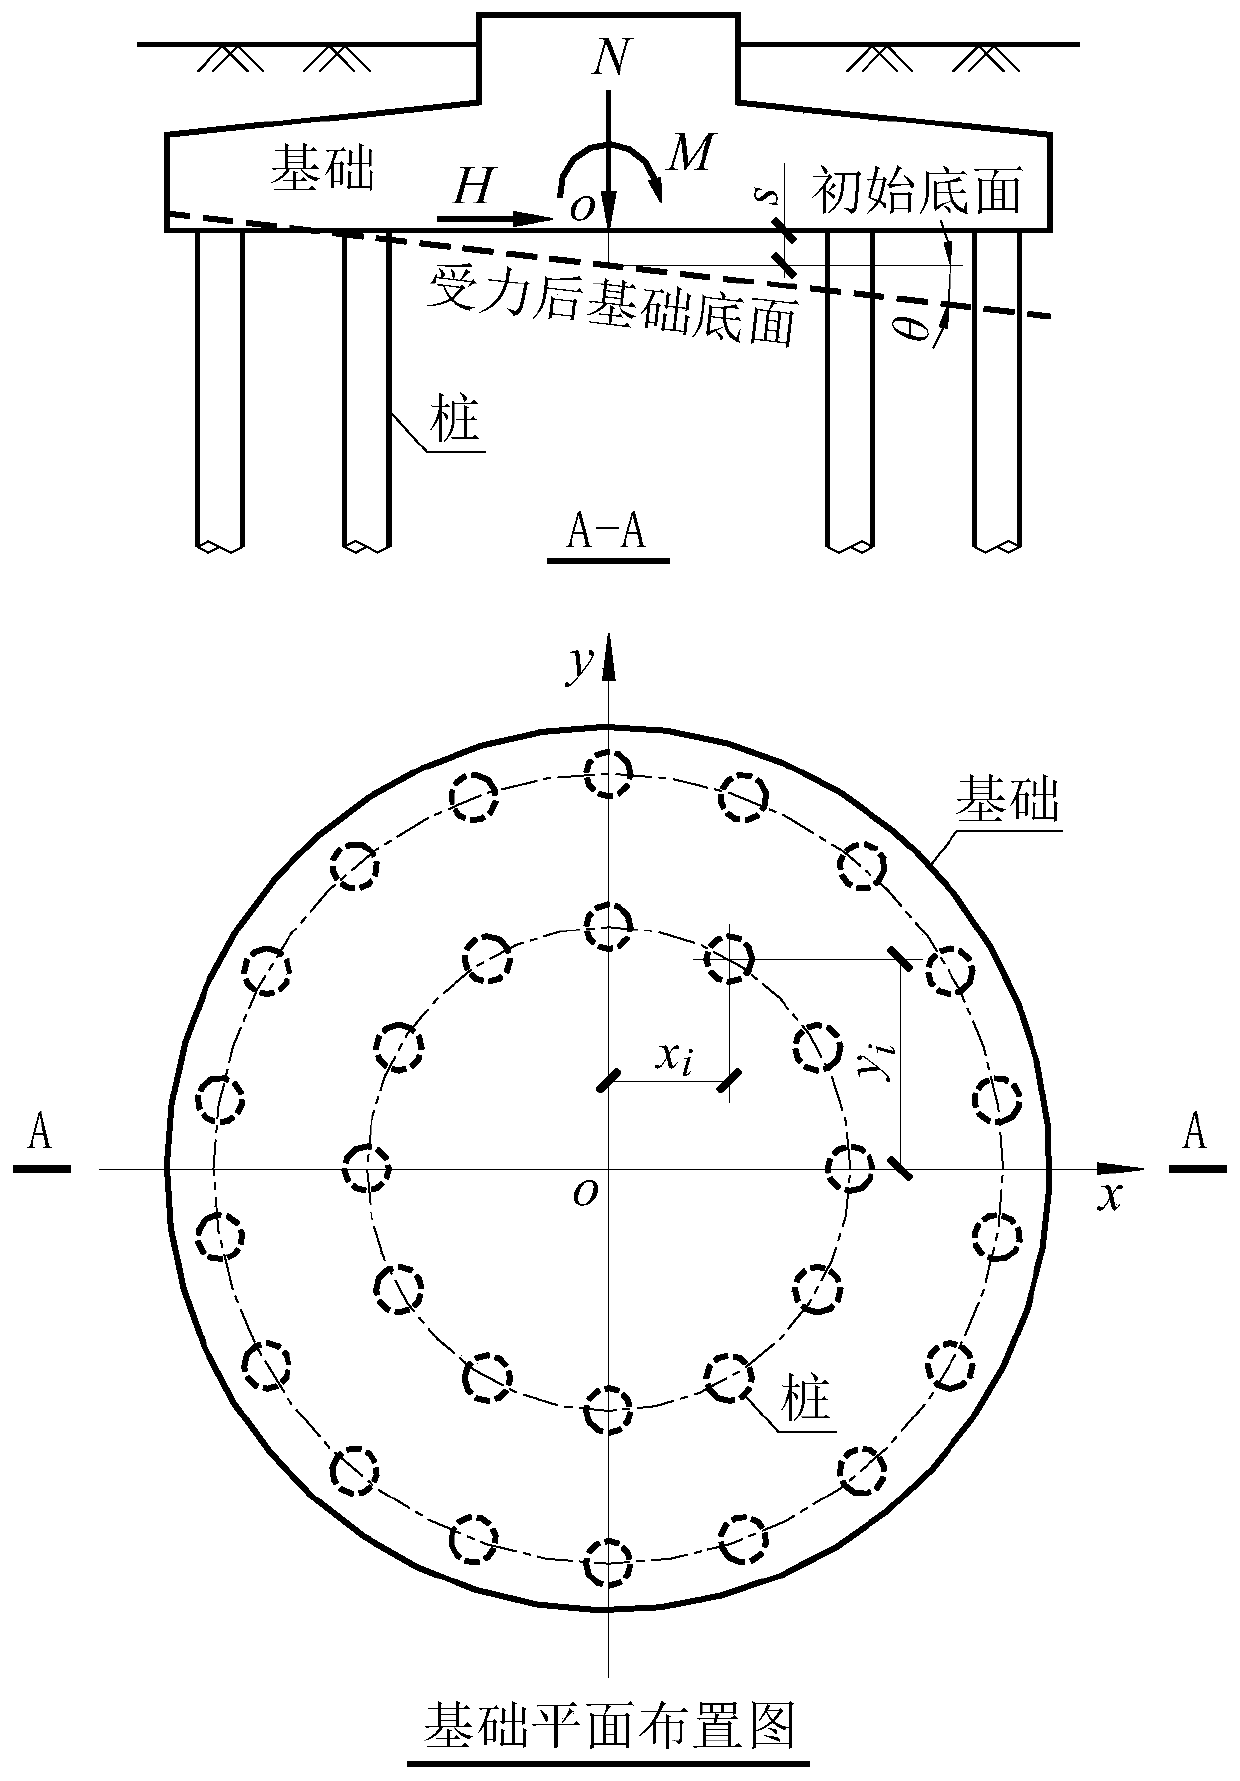 Rigid bearing platform lower pile top vertical force calculation method considering foundation pile rigidity distribution difference